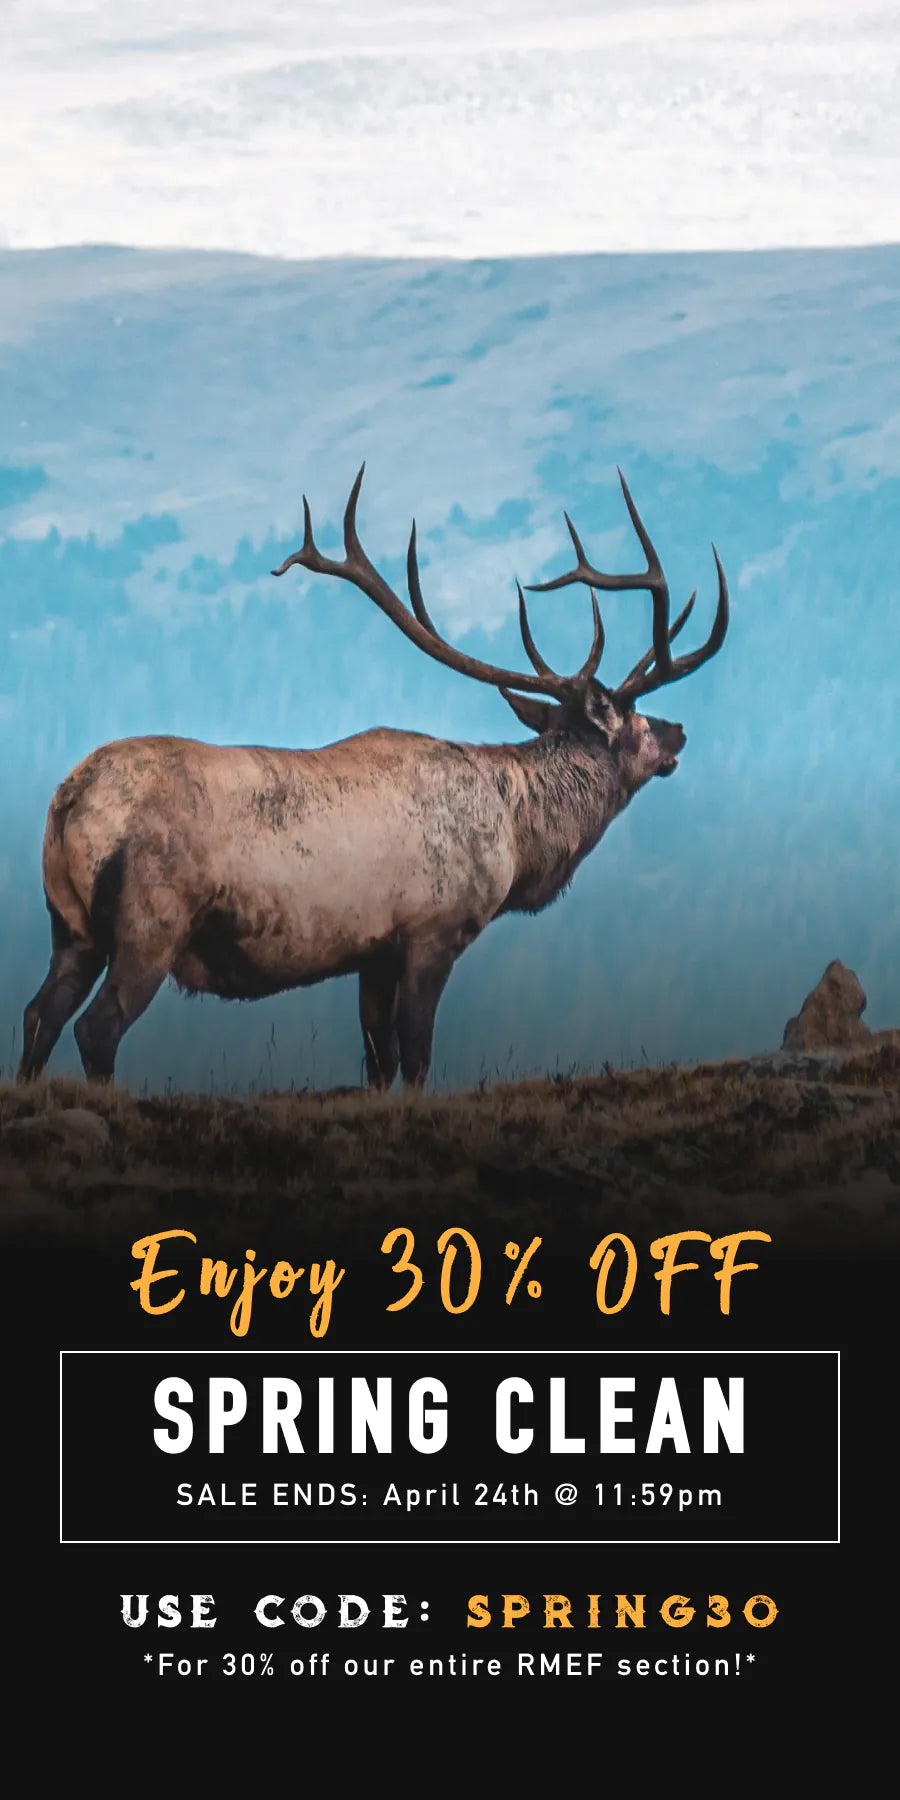 Enjoy 30% OFF - SPRING CLEAN - SALE ENDS: APRIL 24TH @ 11:59PM - USE CODE: SPRING30 *For 30% off our entire RMEF section!*